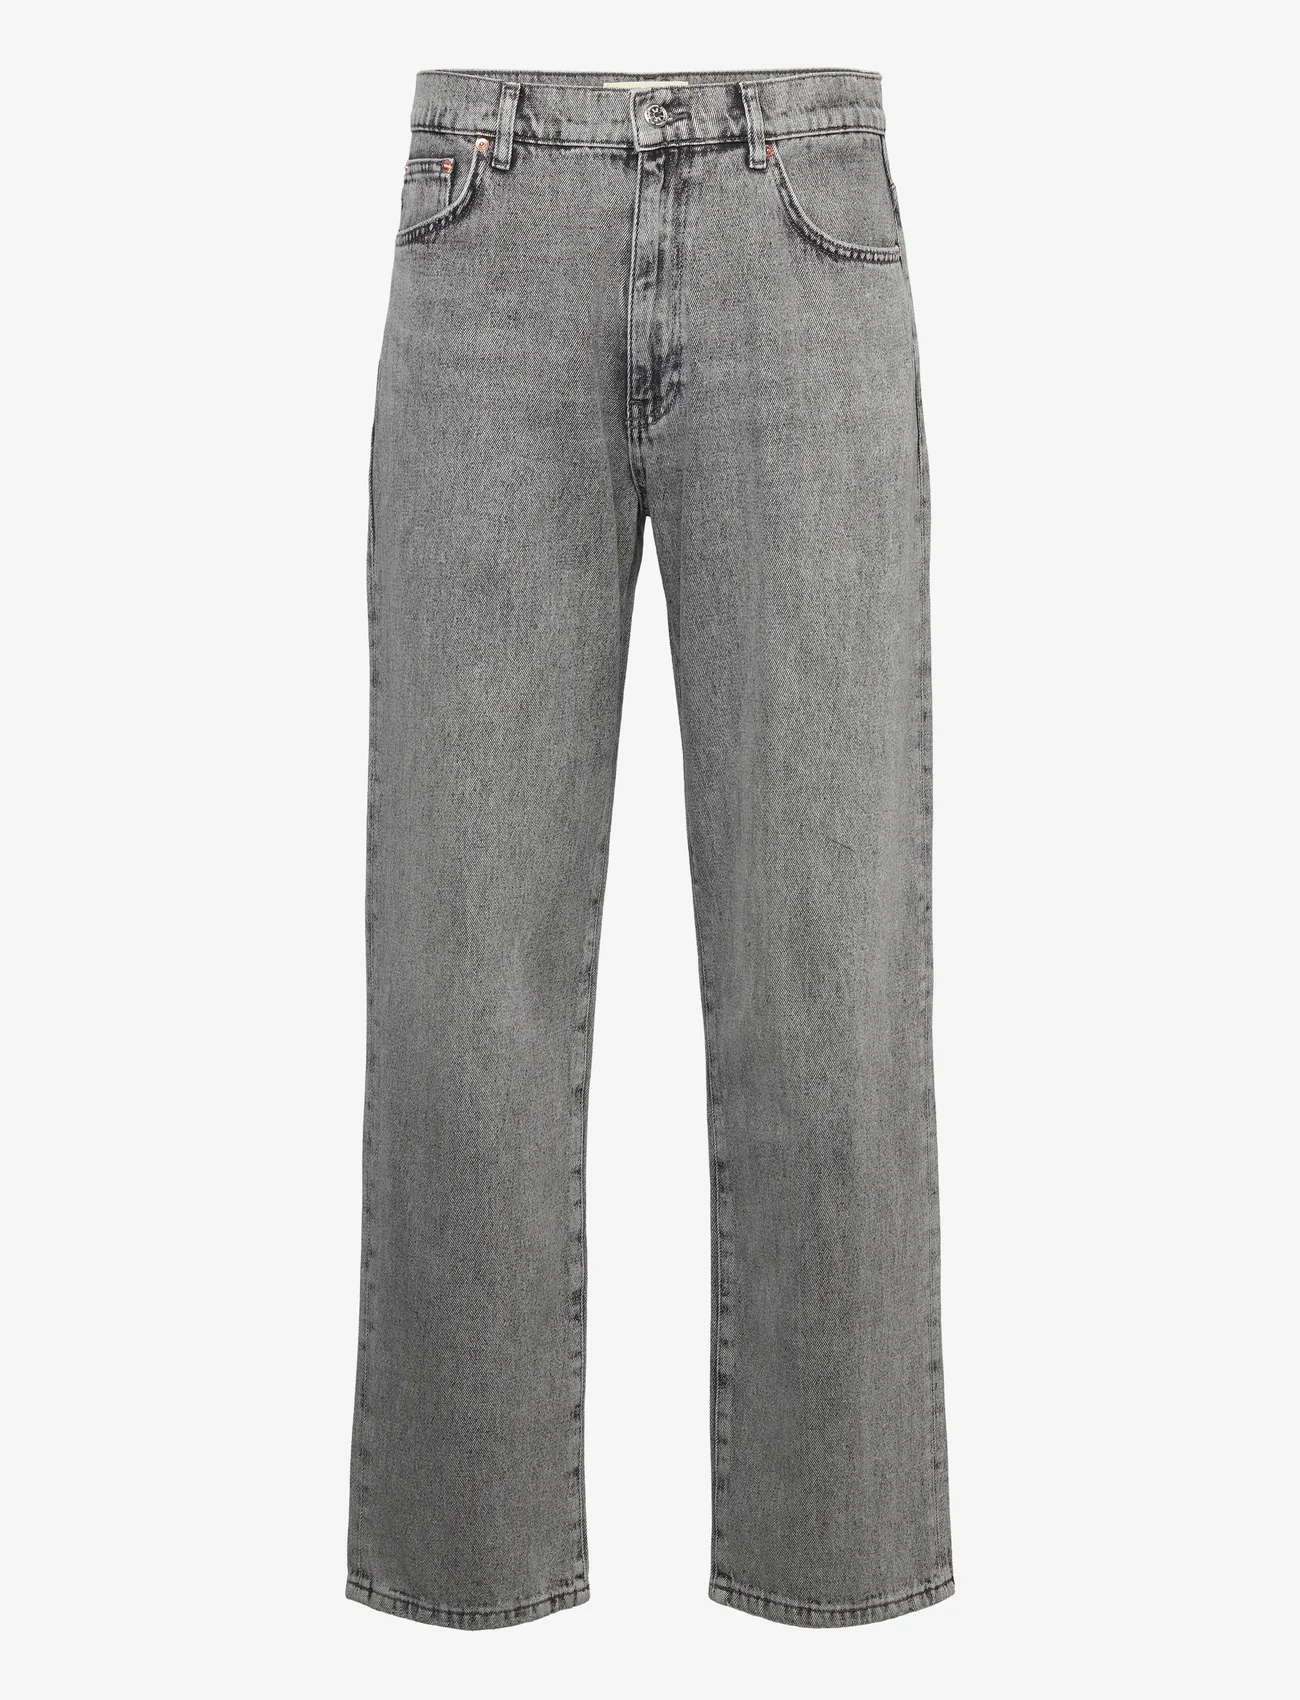 Woodbird Leroy Ash Grey Jeans - Relaxed jeans - Boozt.com